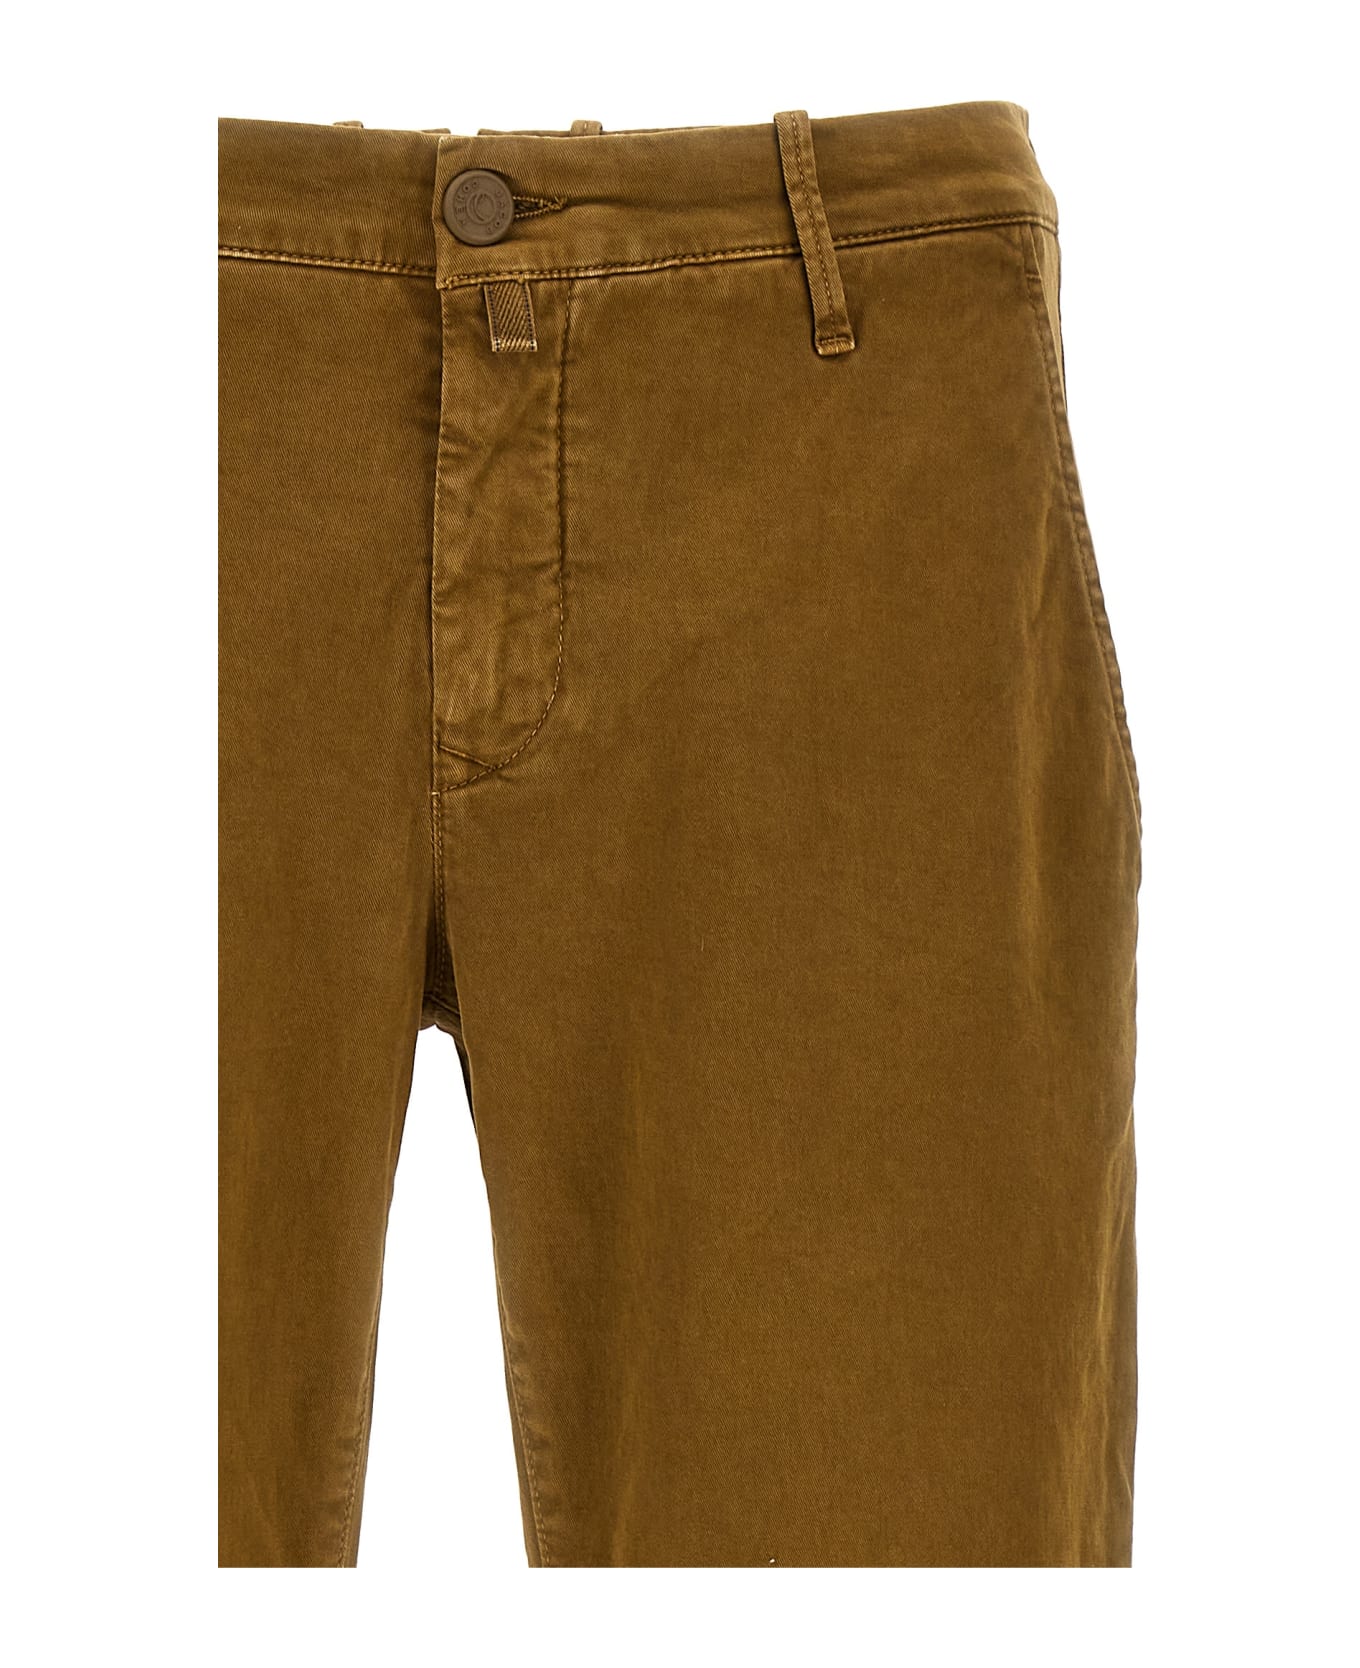 Jacob Cohen Chinos - Brown